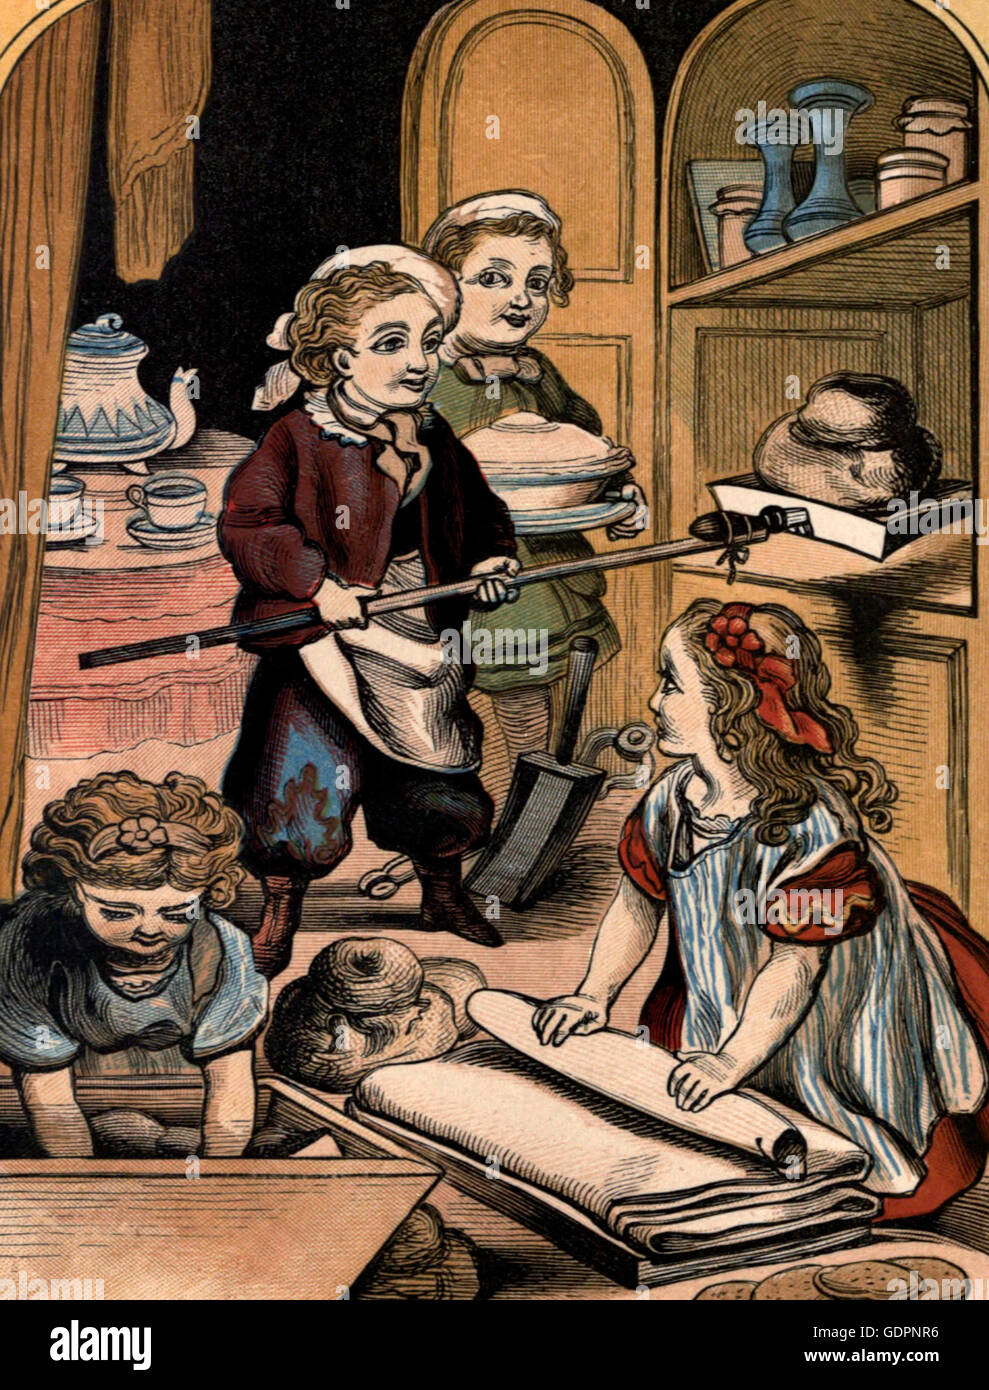 The Little Bakers - Victorian era children playing at baking Stock Photo